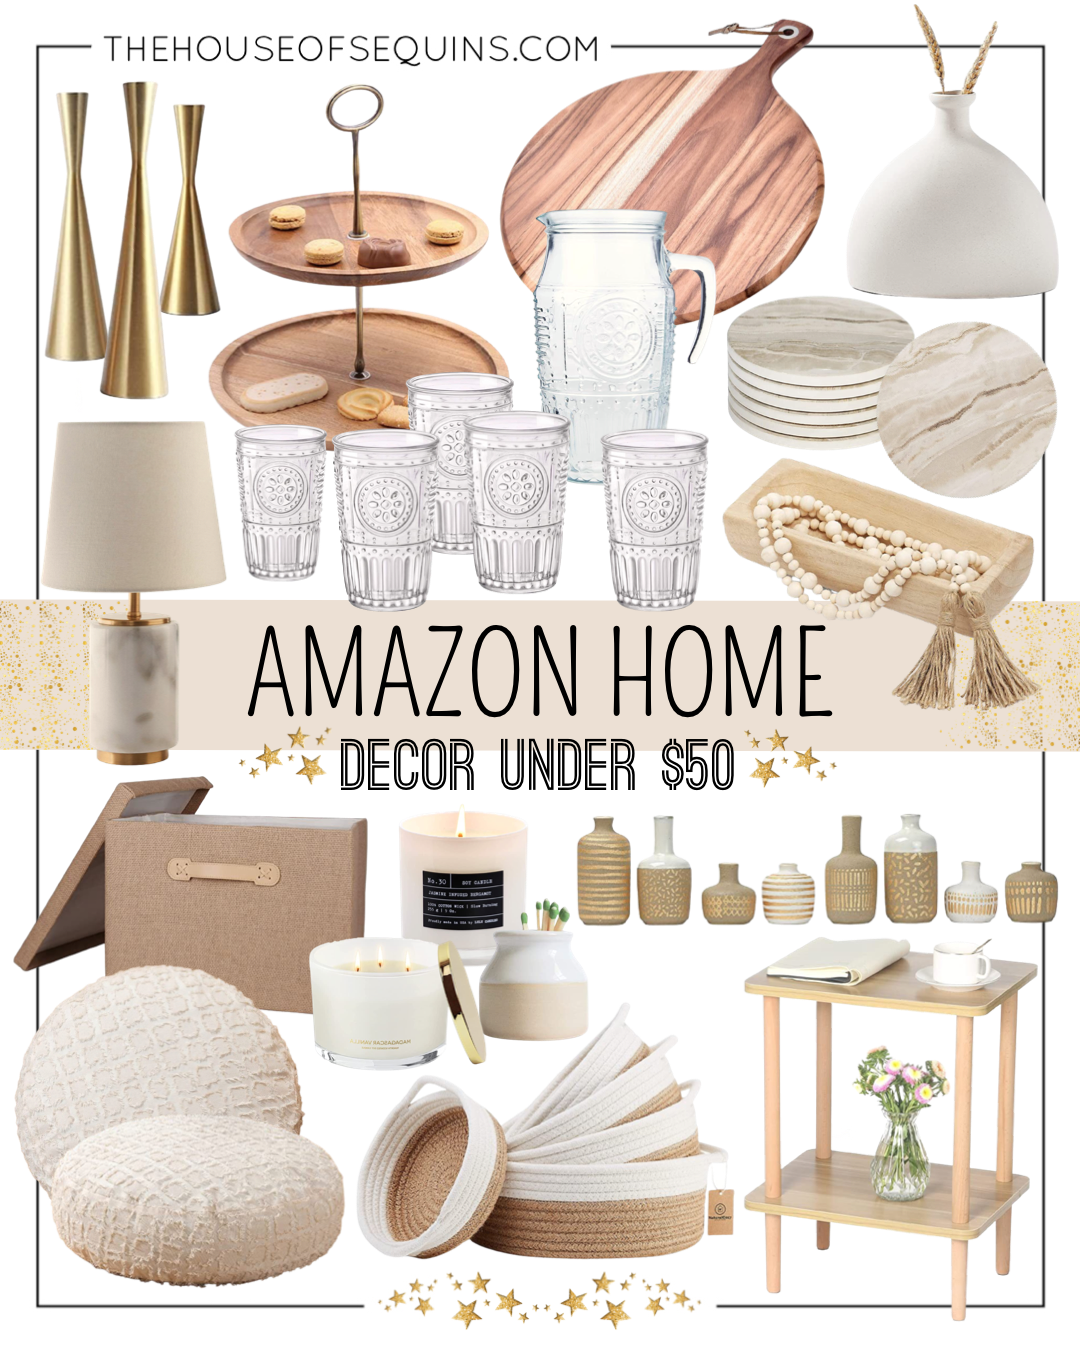 Blogger Sarah Lindner of The House of Sequins sharing Amazon Home decor under $50.